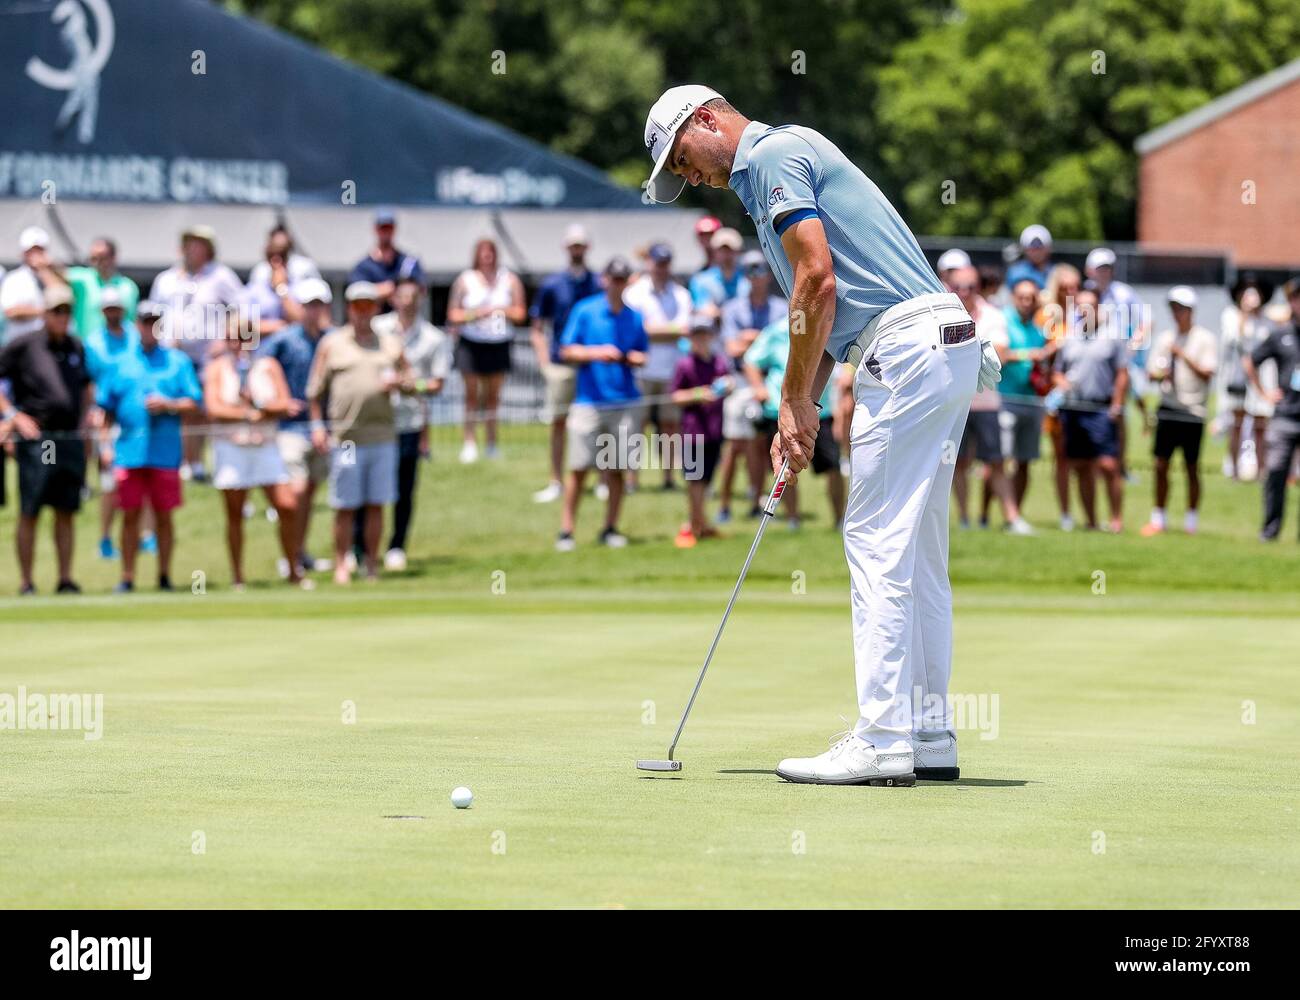 Fort Worth, TX, USA. 29th May, 2021. Justin Thomas putts his ball during  the third round of the Charles Schwab Challenge golf tournament at Colonial  Country Club in Fort Worth, TX. Gray